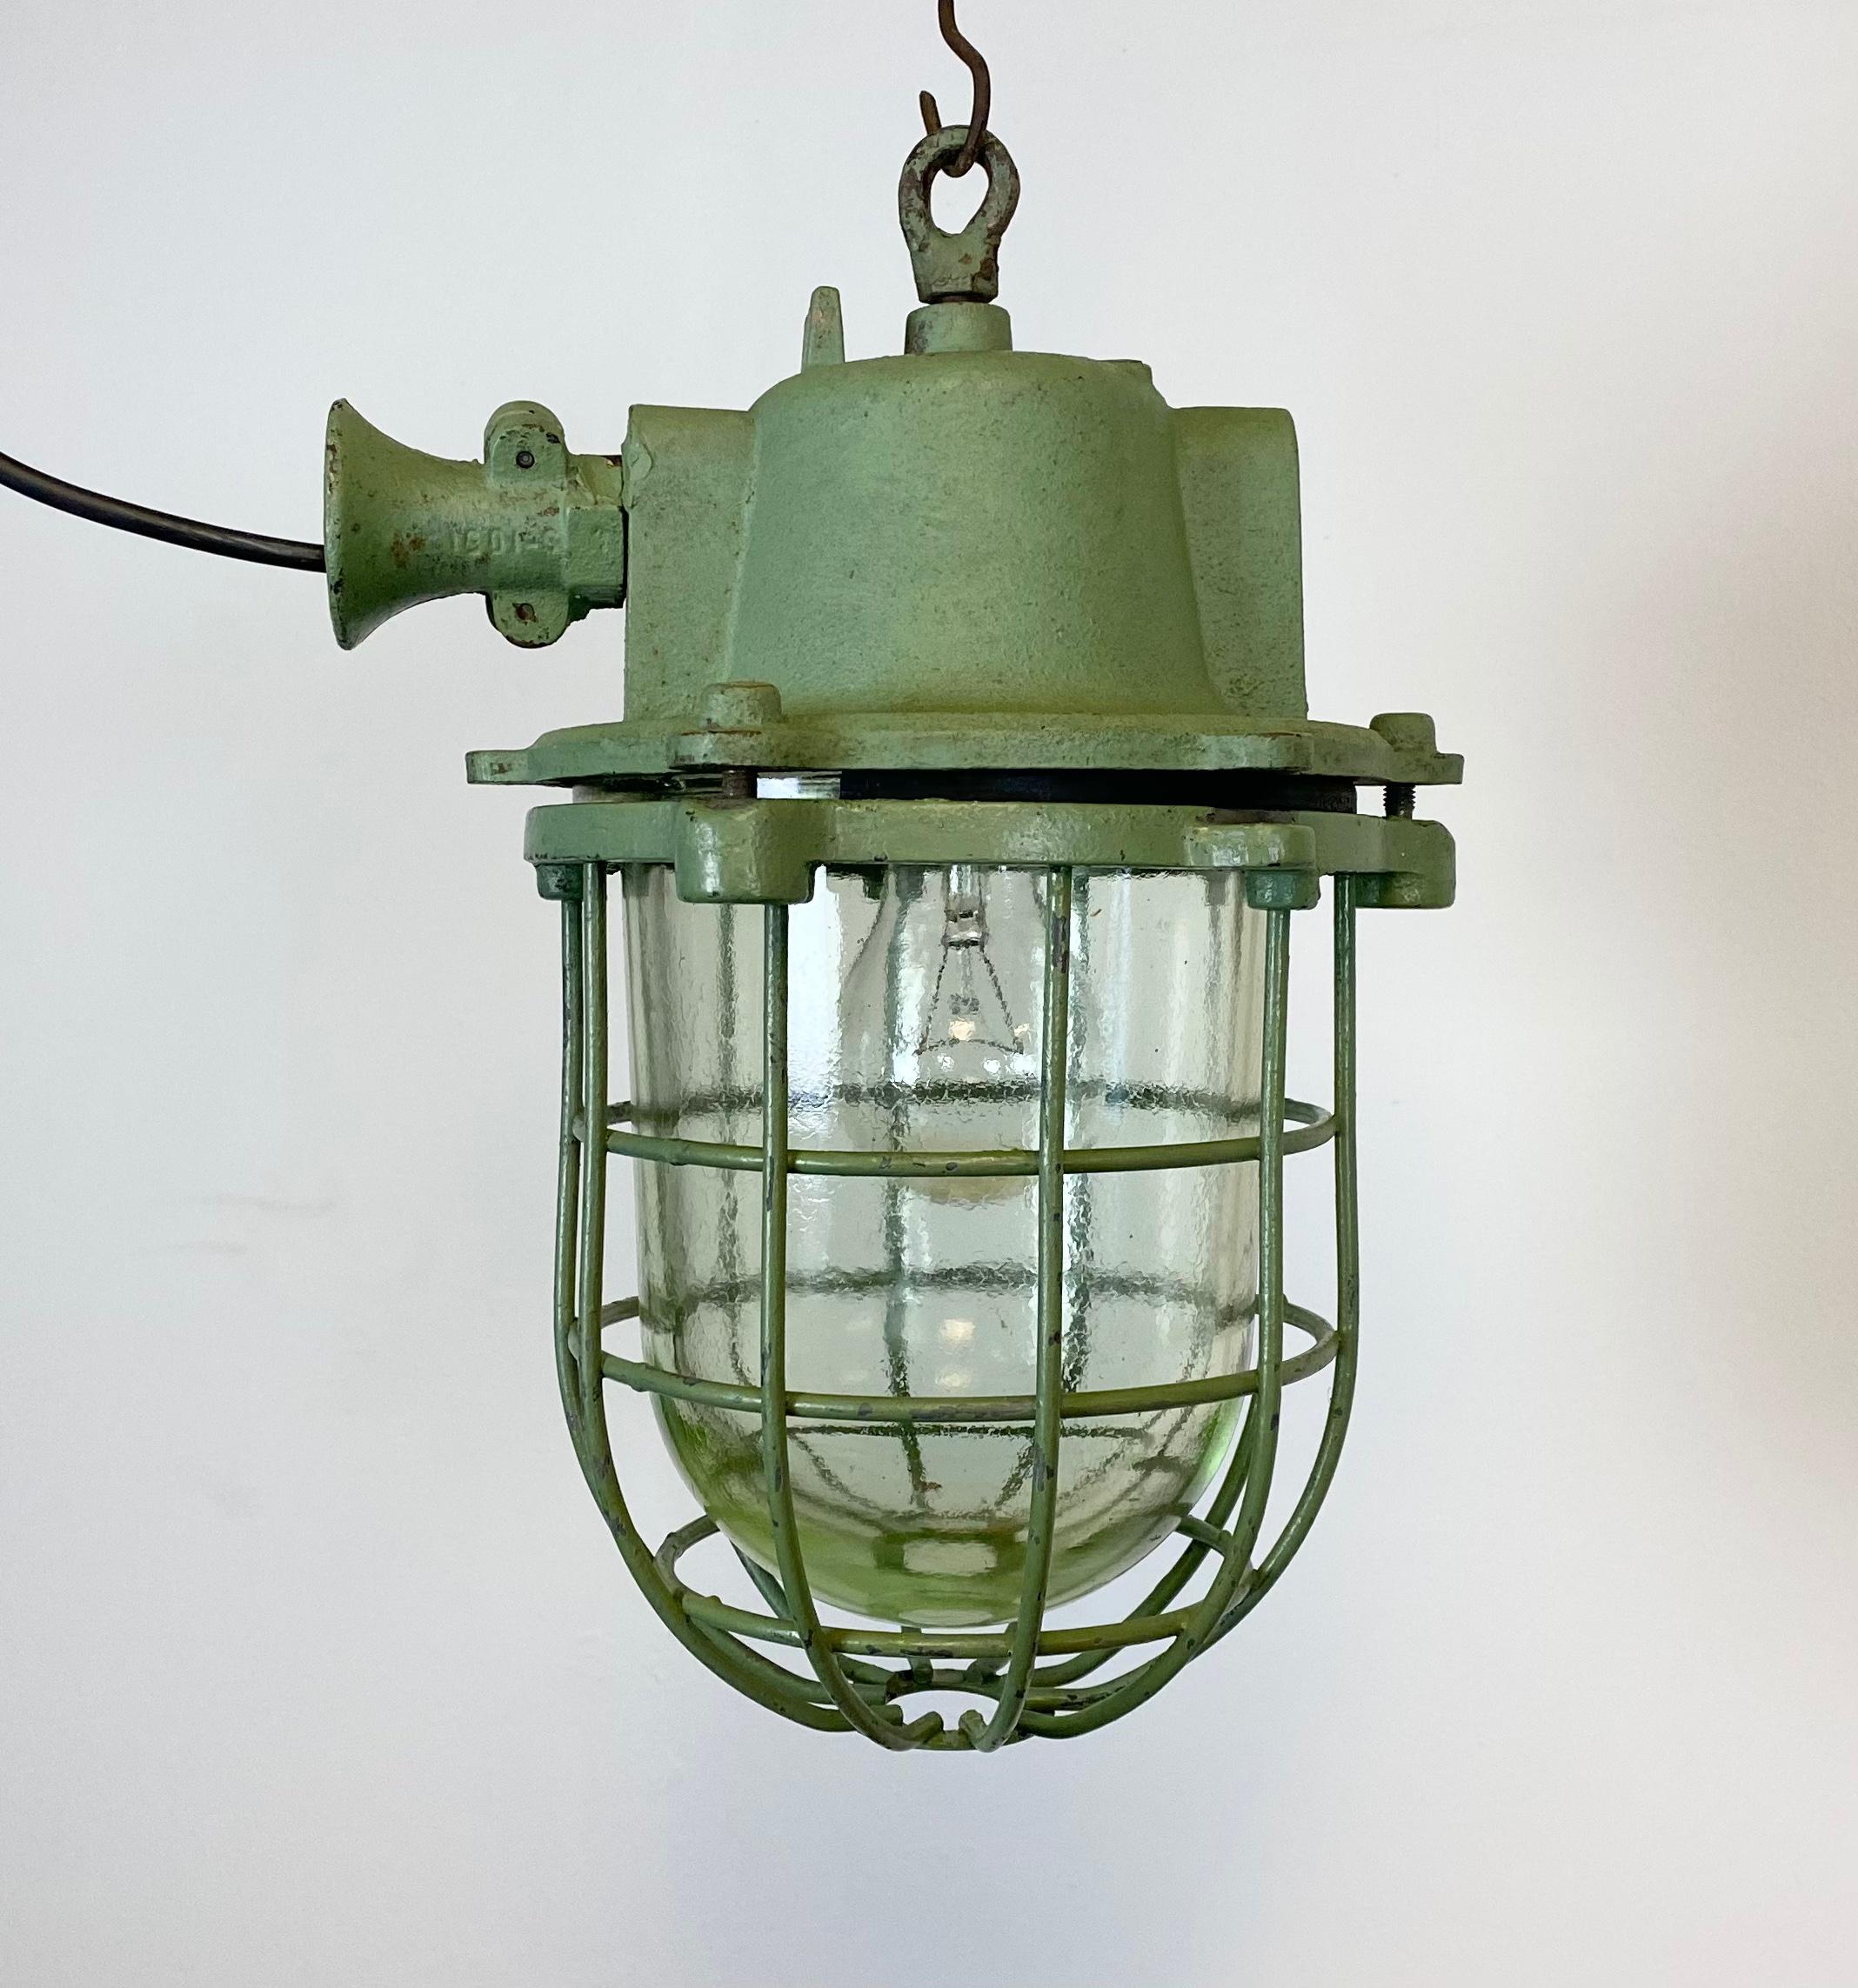 Industrial hanging lamp manufactured during the 1960s in former Czechoslovakia. It features cast iron top, clear glass cover and iron grid. Porcelain socket for E 27 lightbulbs and new wire. The weight of the lamp is 8 kg.